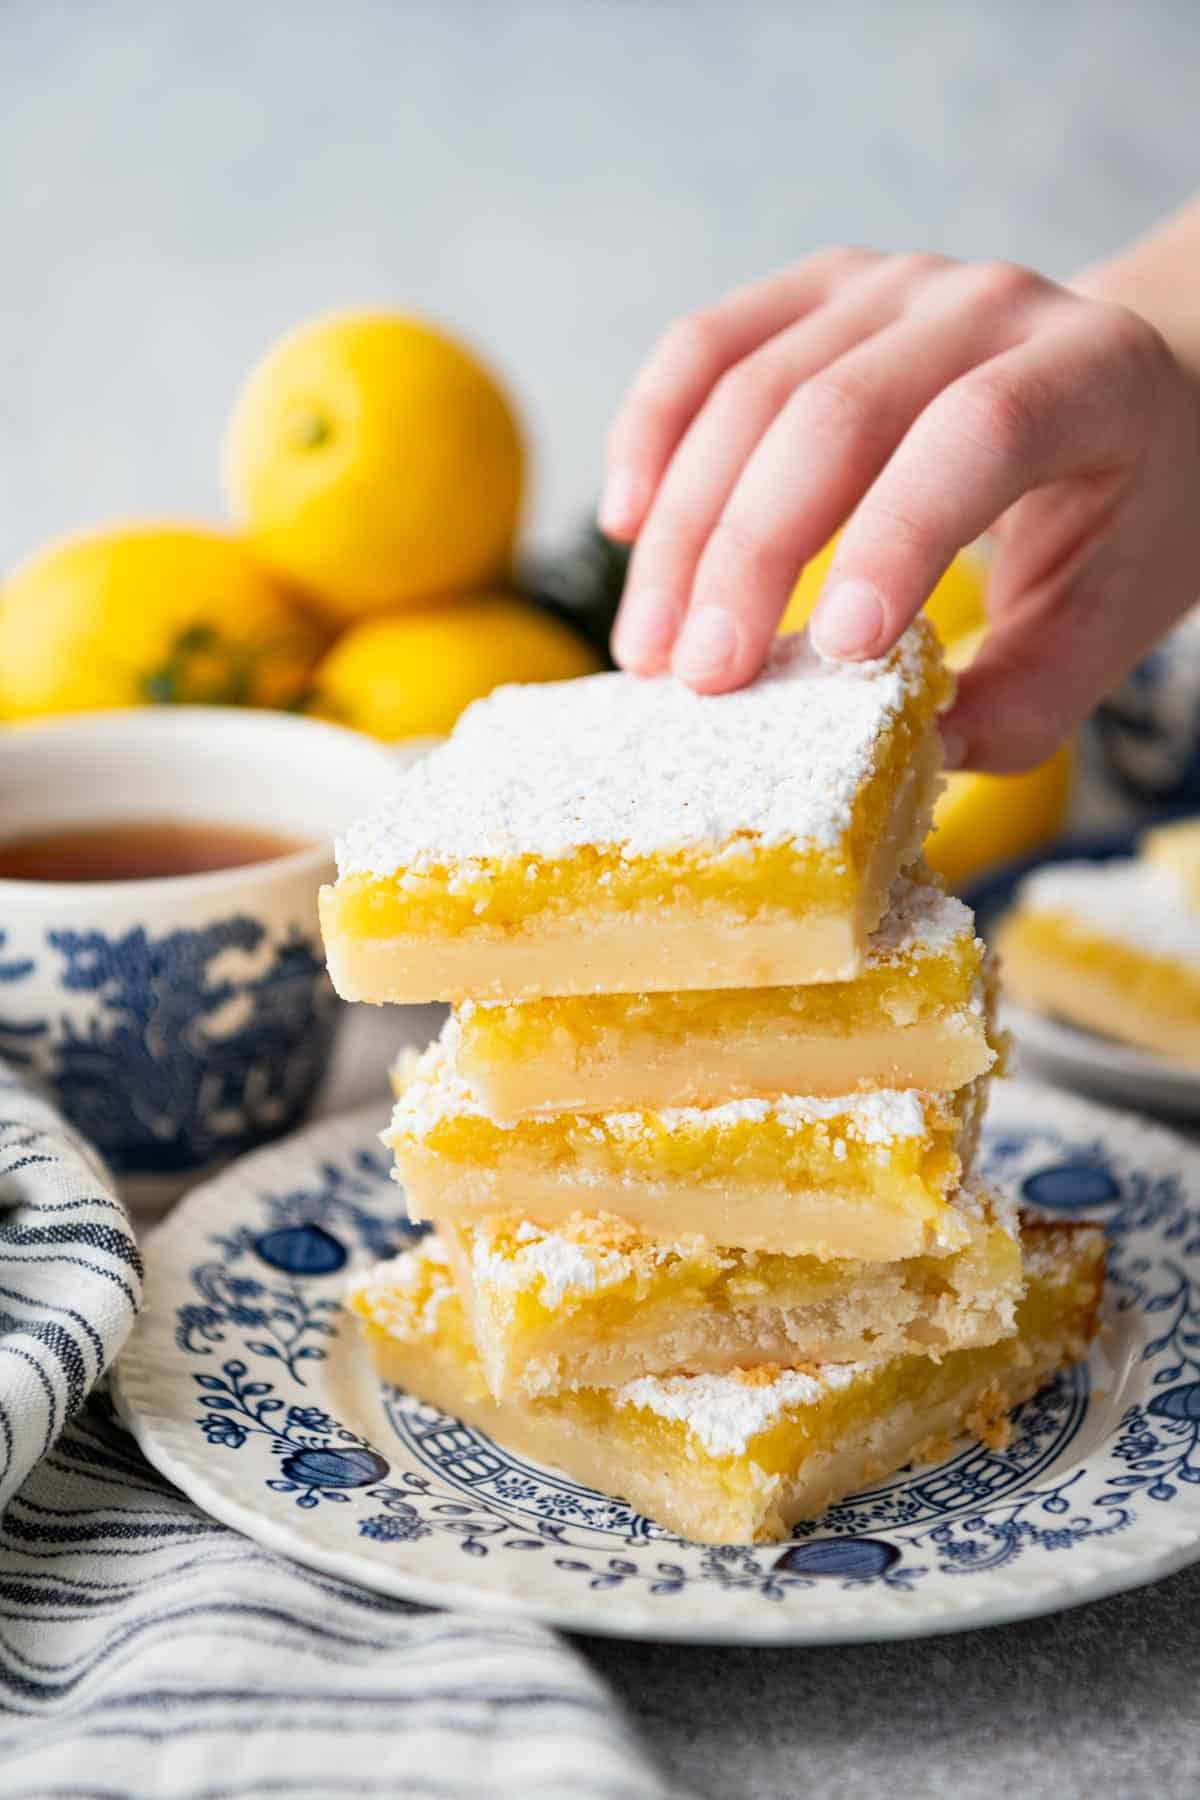 Hands picking up a bar from a stack of old fashioned lemon squares.